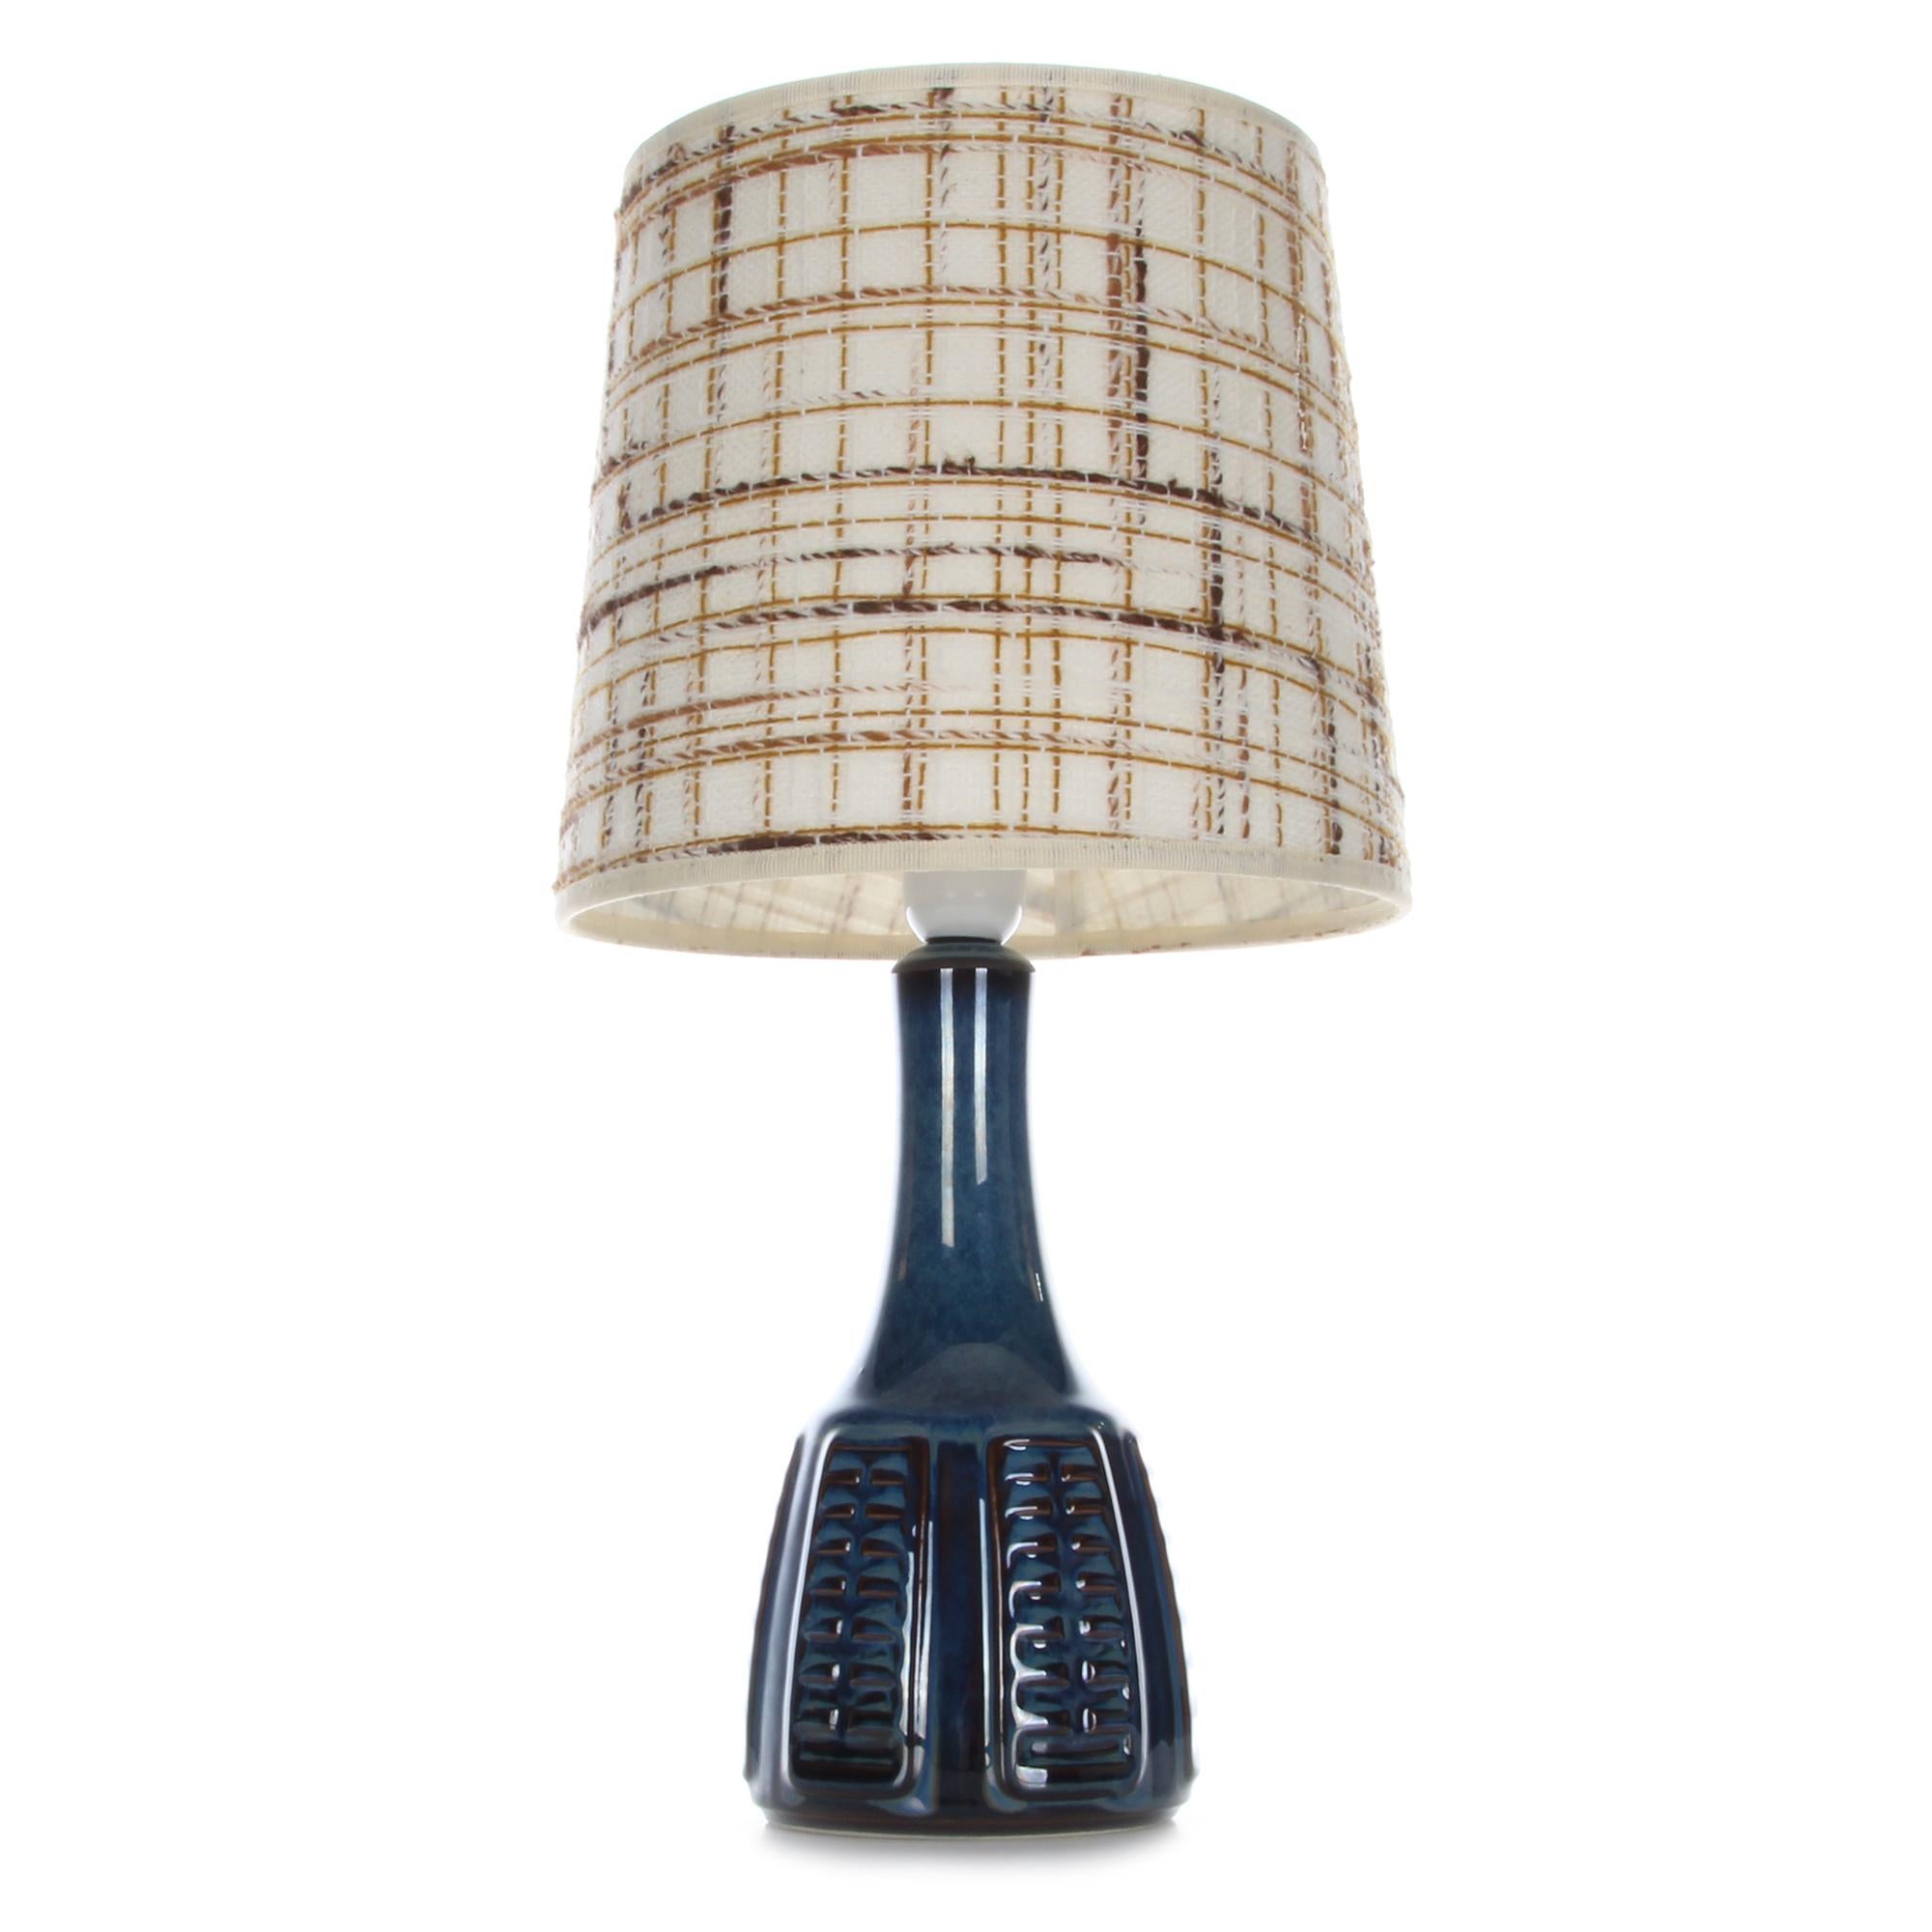 Scandinavian Modern Blue Table Lamp by Einar Johansen for Soholm 1960s, with Vintage Shade Included